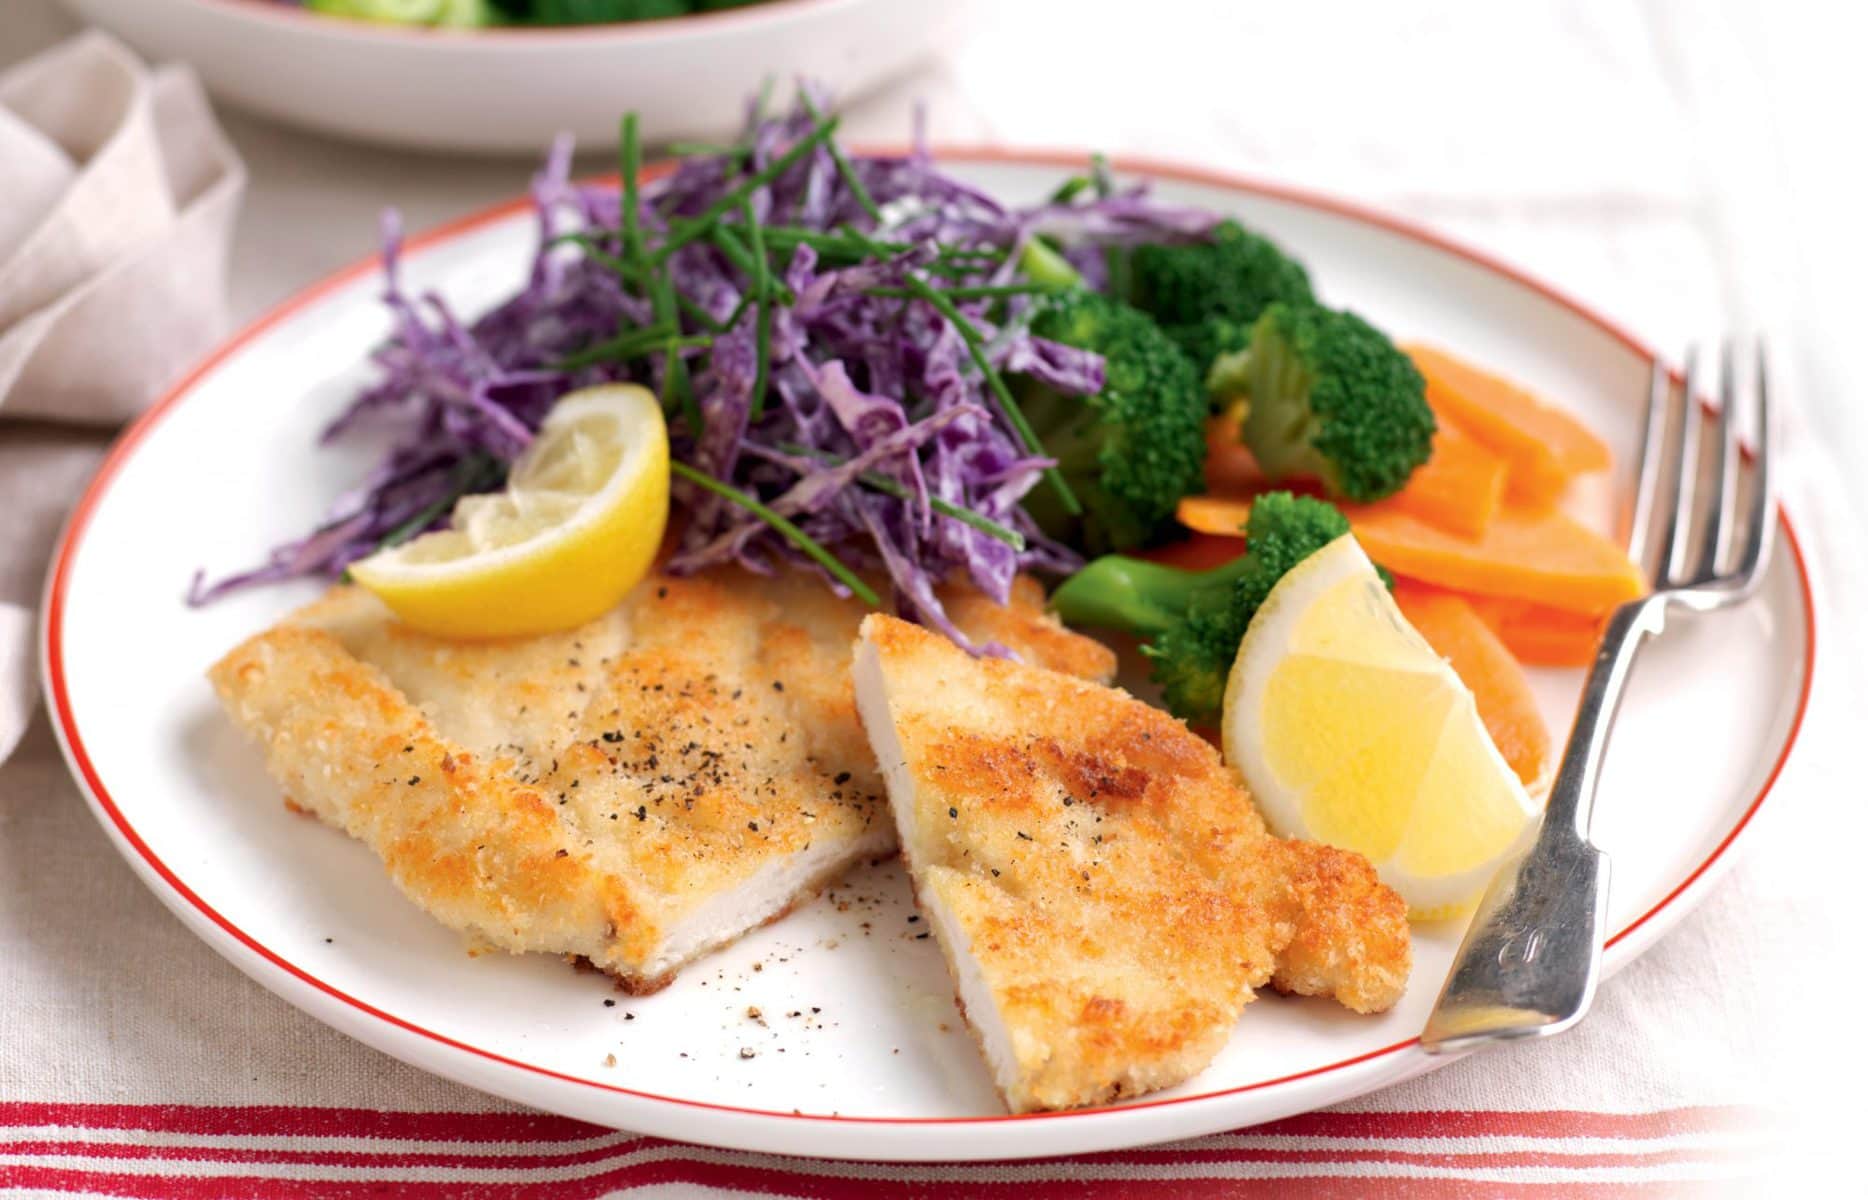 10 of our most popular schnitzel recipes - Healthy Food Guide